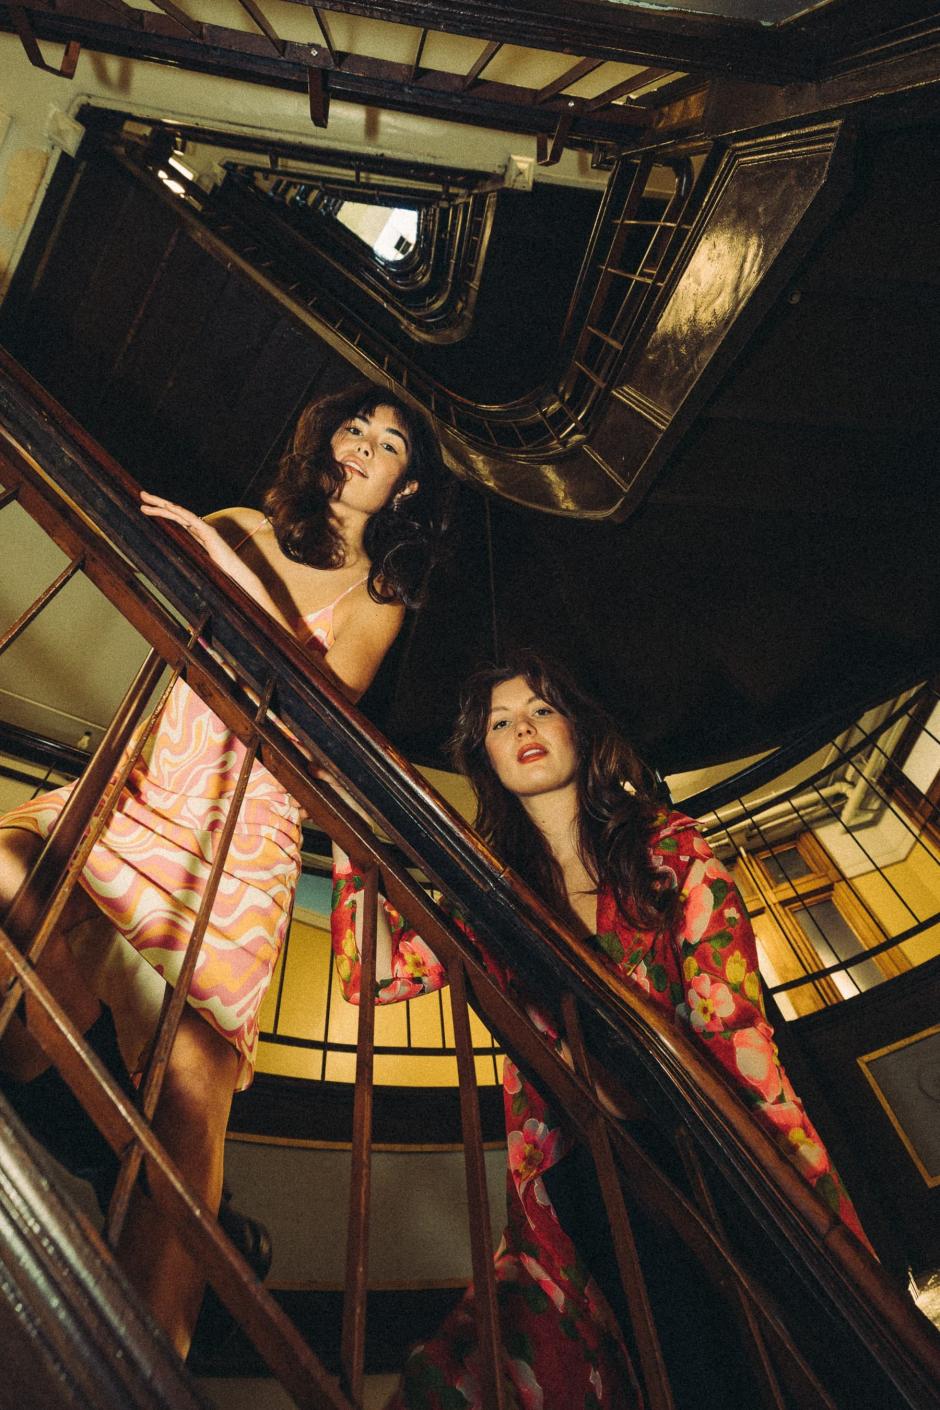 Lauren and Kate are looking down a stairwell into the lens of the camera. 